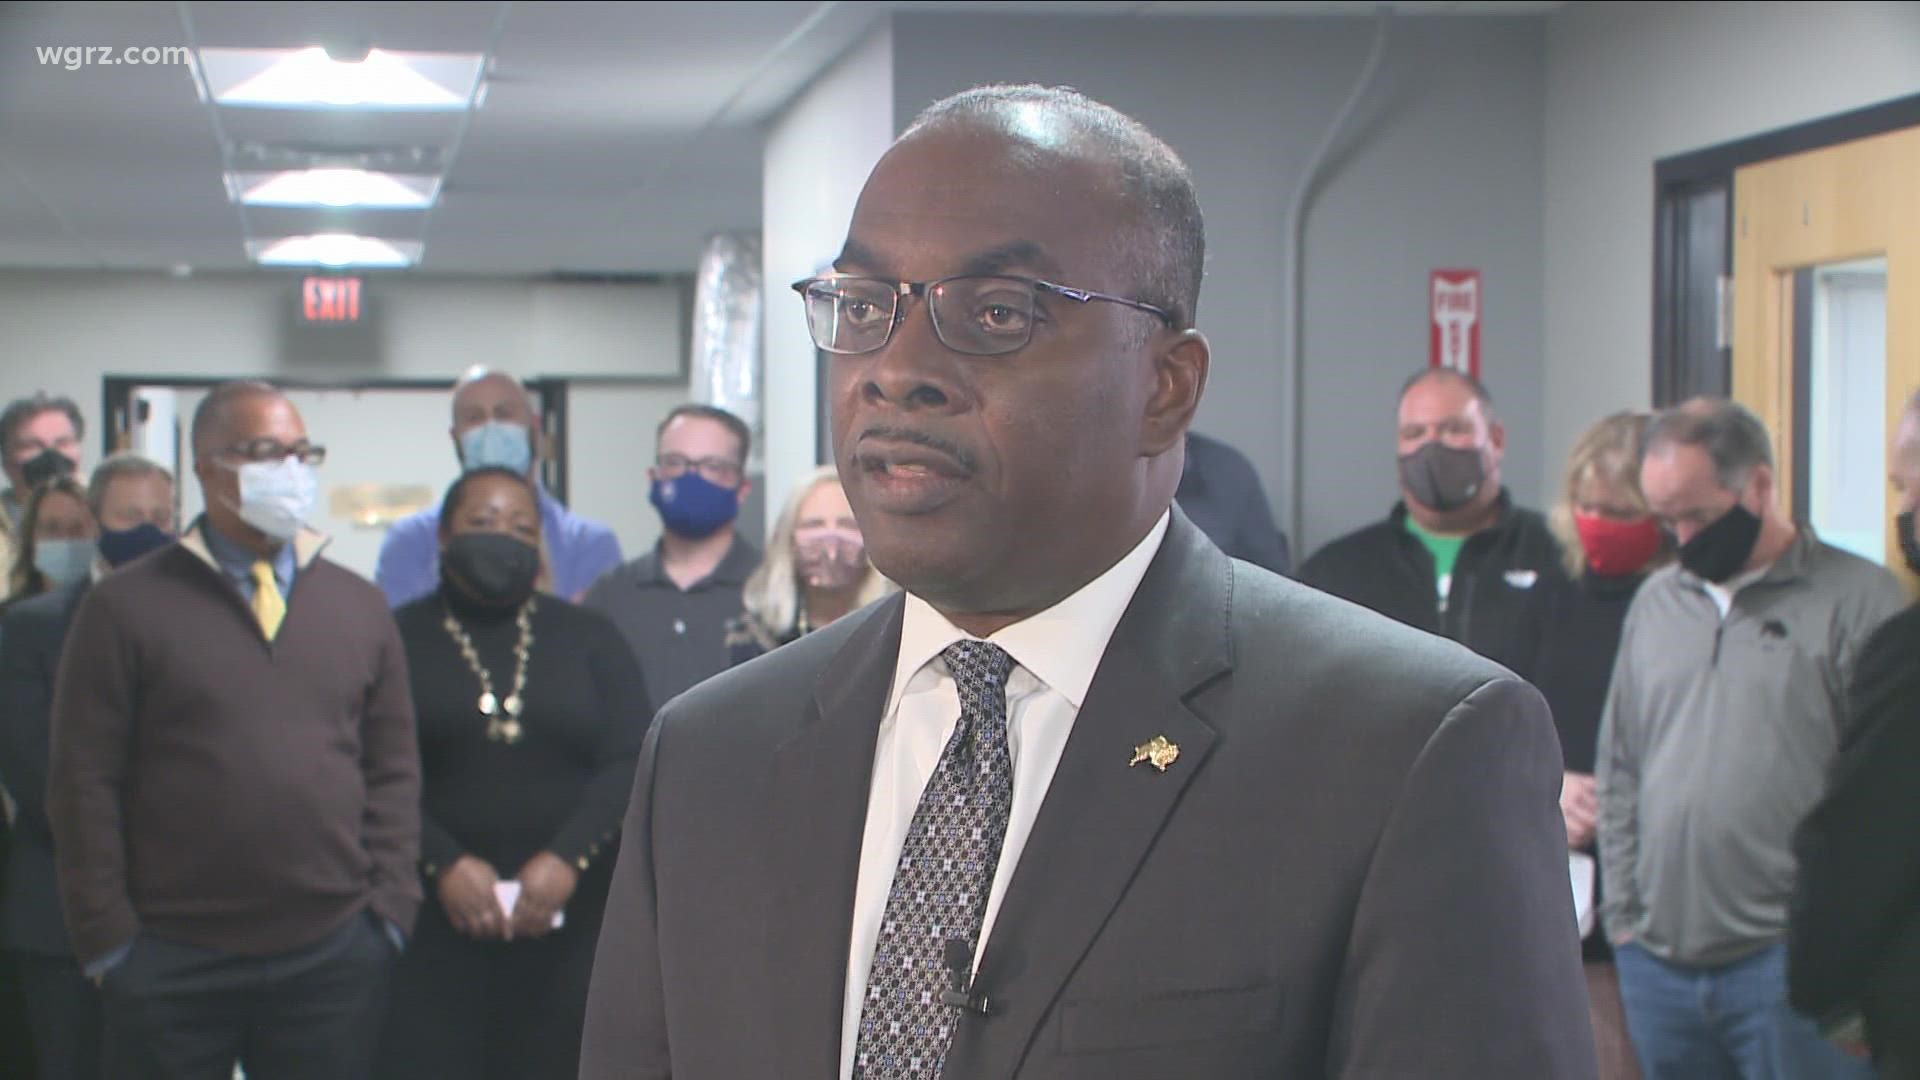 It is official, Mayor Byron Brown has been re-elected to a fifth term as Mayor of the City of Buffalo, a historic turn of events as a write-in candidate.